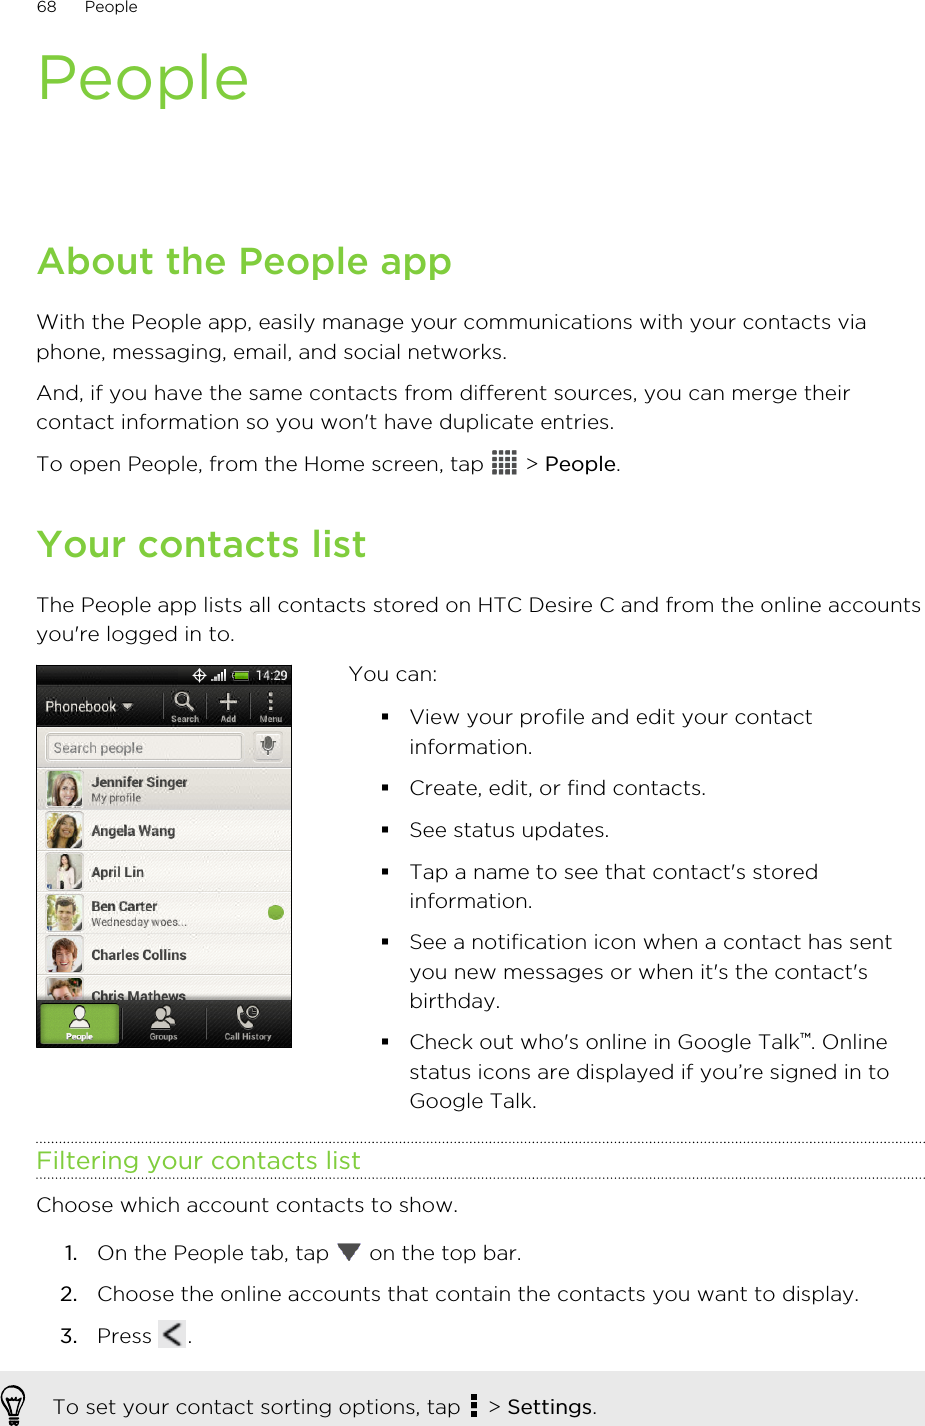 PeopleAbout the People appWith the People app, easily manage your communications with your contacts viaphone, messaging, email, and social networks.And, if you have the same contacts from different sources, you can merge theircontact information so you won&apos;t have duplicate entries.To open People, from the Home screen, tap   &gt; People.Your contacts listThe People app lists all contacts stored on HTC Desire C and from the online accountsyou&apos;re logged in to.You can:§View your profile and edit your contactinformation.§Create, edit, or find contacts.§See status updates.§Tap a name to see that contact&apos;s storedinformation.§See a notification icon when a contact has sentyou new messages or when it&apos;s the contact&apos;sbirthday.§Check out who&apos;s online in Google Talk™. Onlinestatus icons are displayed if you’re signed in toGoogle Talk.Filtering your contacts listChoose which account contacts to show.1. On the People tab, tap   on the top bar.2. Choose the online accounts that contain the contacts you want to display.3. Press  .To set your contact sorting options, tap   &gt; Settings.68 People